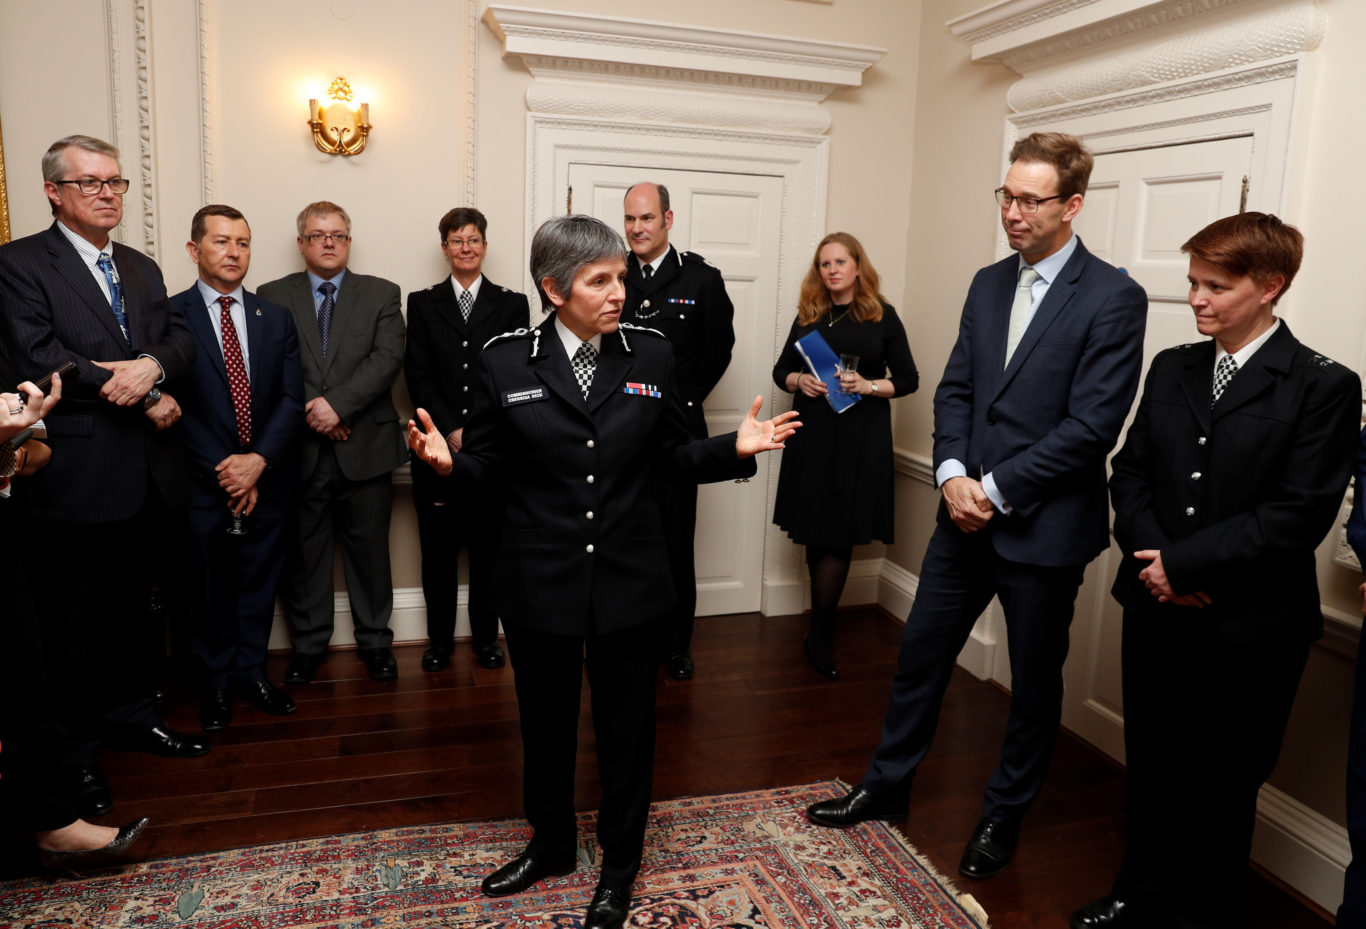 Metropolitan Police Commissioner Cressida Dick makes a speech during the reception (Adrian Dennis/PA)